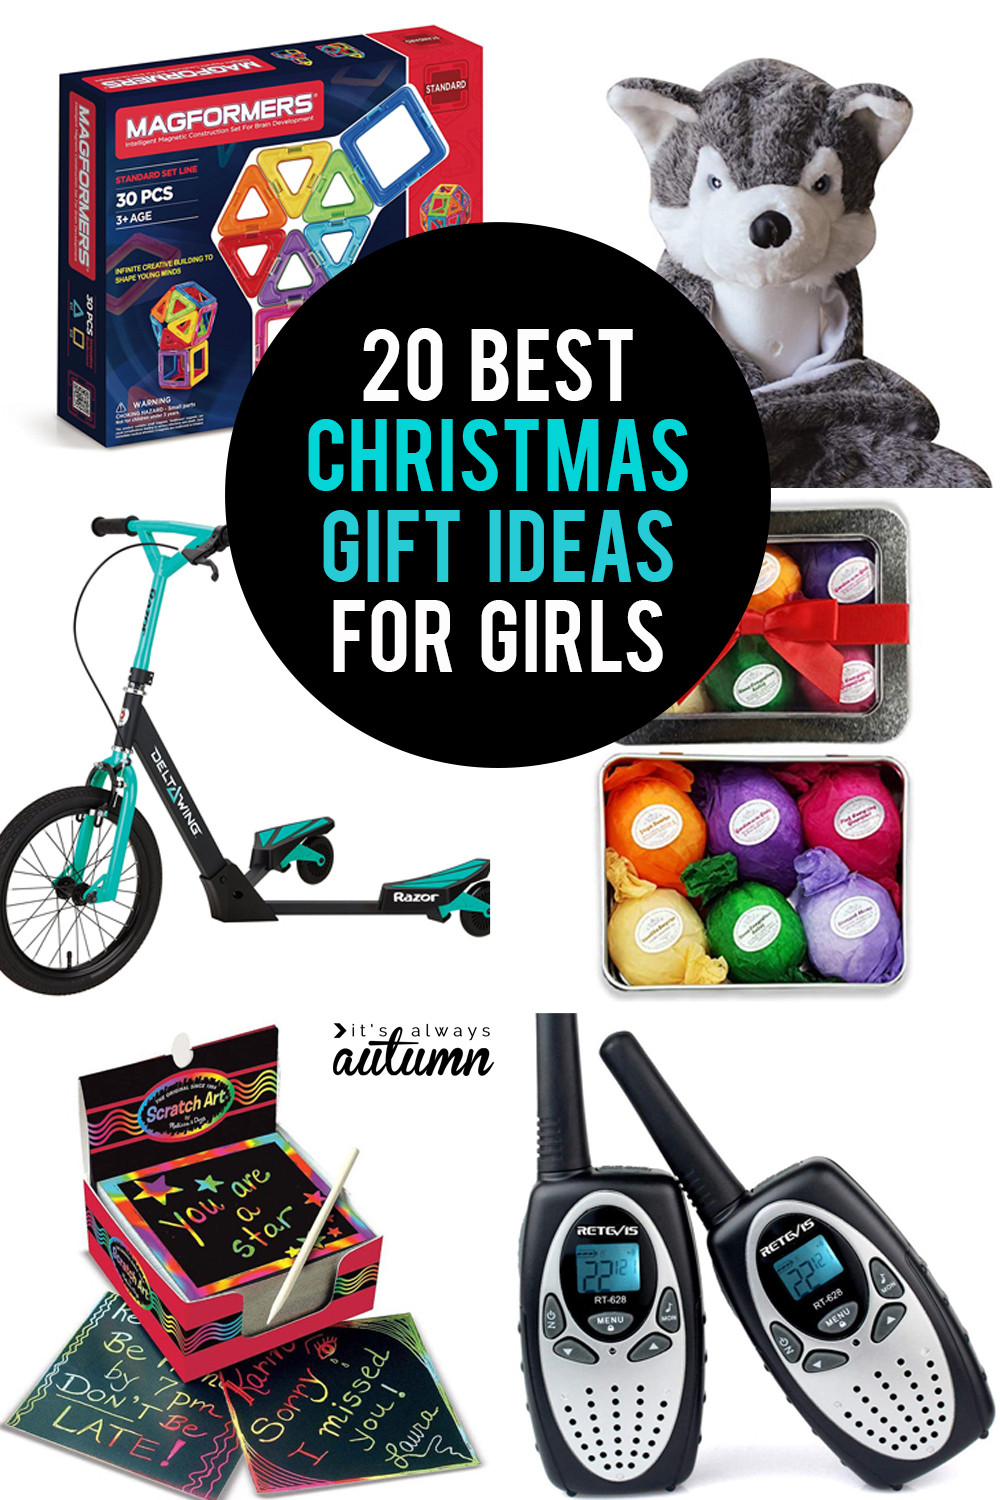 Good Gift Ideas For Girls
 The 20 best Christmas ts for girls It s Always Autumn